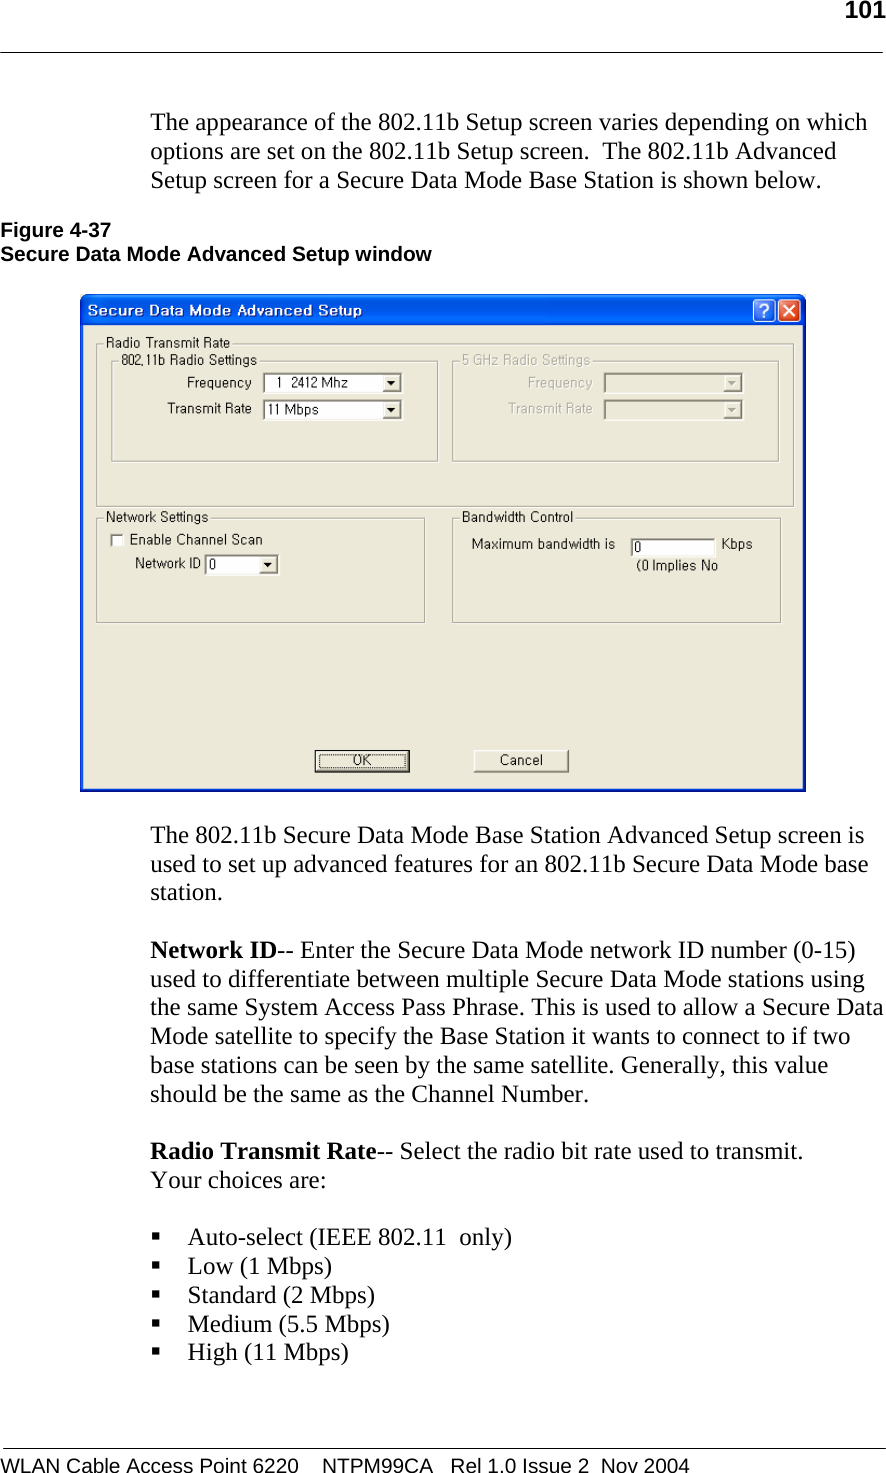   101  WLAN Cable Access Point 6220    NTPM99CA   Rel 1.0 Issue 2  Nov 2004 The appearance of the 802.11b Setup screen varies depending on which options are set on the 802.11b Setup screen.  The 802.11b Advanced Setup screen for a Secure Data Mode Base Station is shown below.  Figure 4-37 Secure Data Mode Advanced Setup window    The 802.11b Secure Data Mode Base Station Advanced Setup screen is used to set up advanced features for an 802.11b Secure Data Mode base station.    Network ID-- Enter the Secure Data Mode network ID number (0-15) used to differentiate between multiple Secure Data Mode stations using the same System Access Pass Phrase. This is used to allow a Secure Data Mode satellite to specify the Base Station it wants to connect to if two base stations can be seen by the same satellite. Generally, this value should be the same as the Channel Number.  Radio Transmit Rate-- Select the radio bit rate used to transmit.  Your choices are:   Auto-select (IEEE 802.11  only)  Low (1 Mbps)  Standard (2 Mbps)  Medium (5.5 Mbps)  High (11 Mbps)  